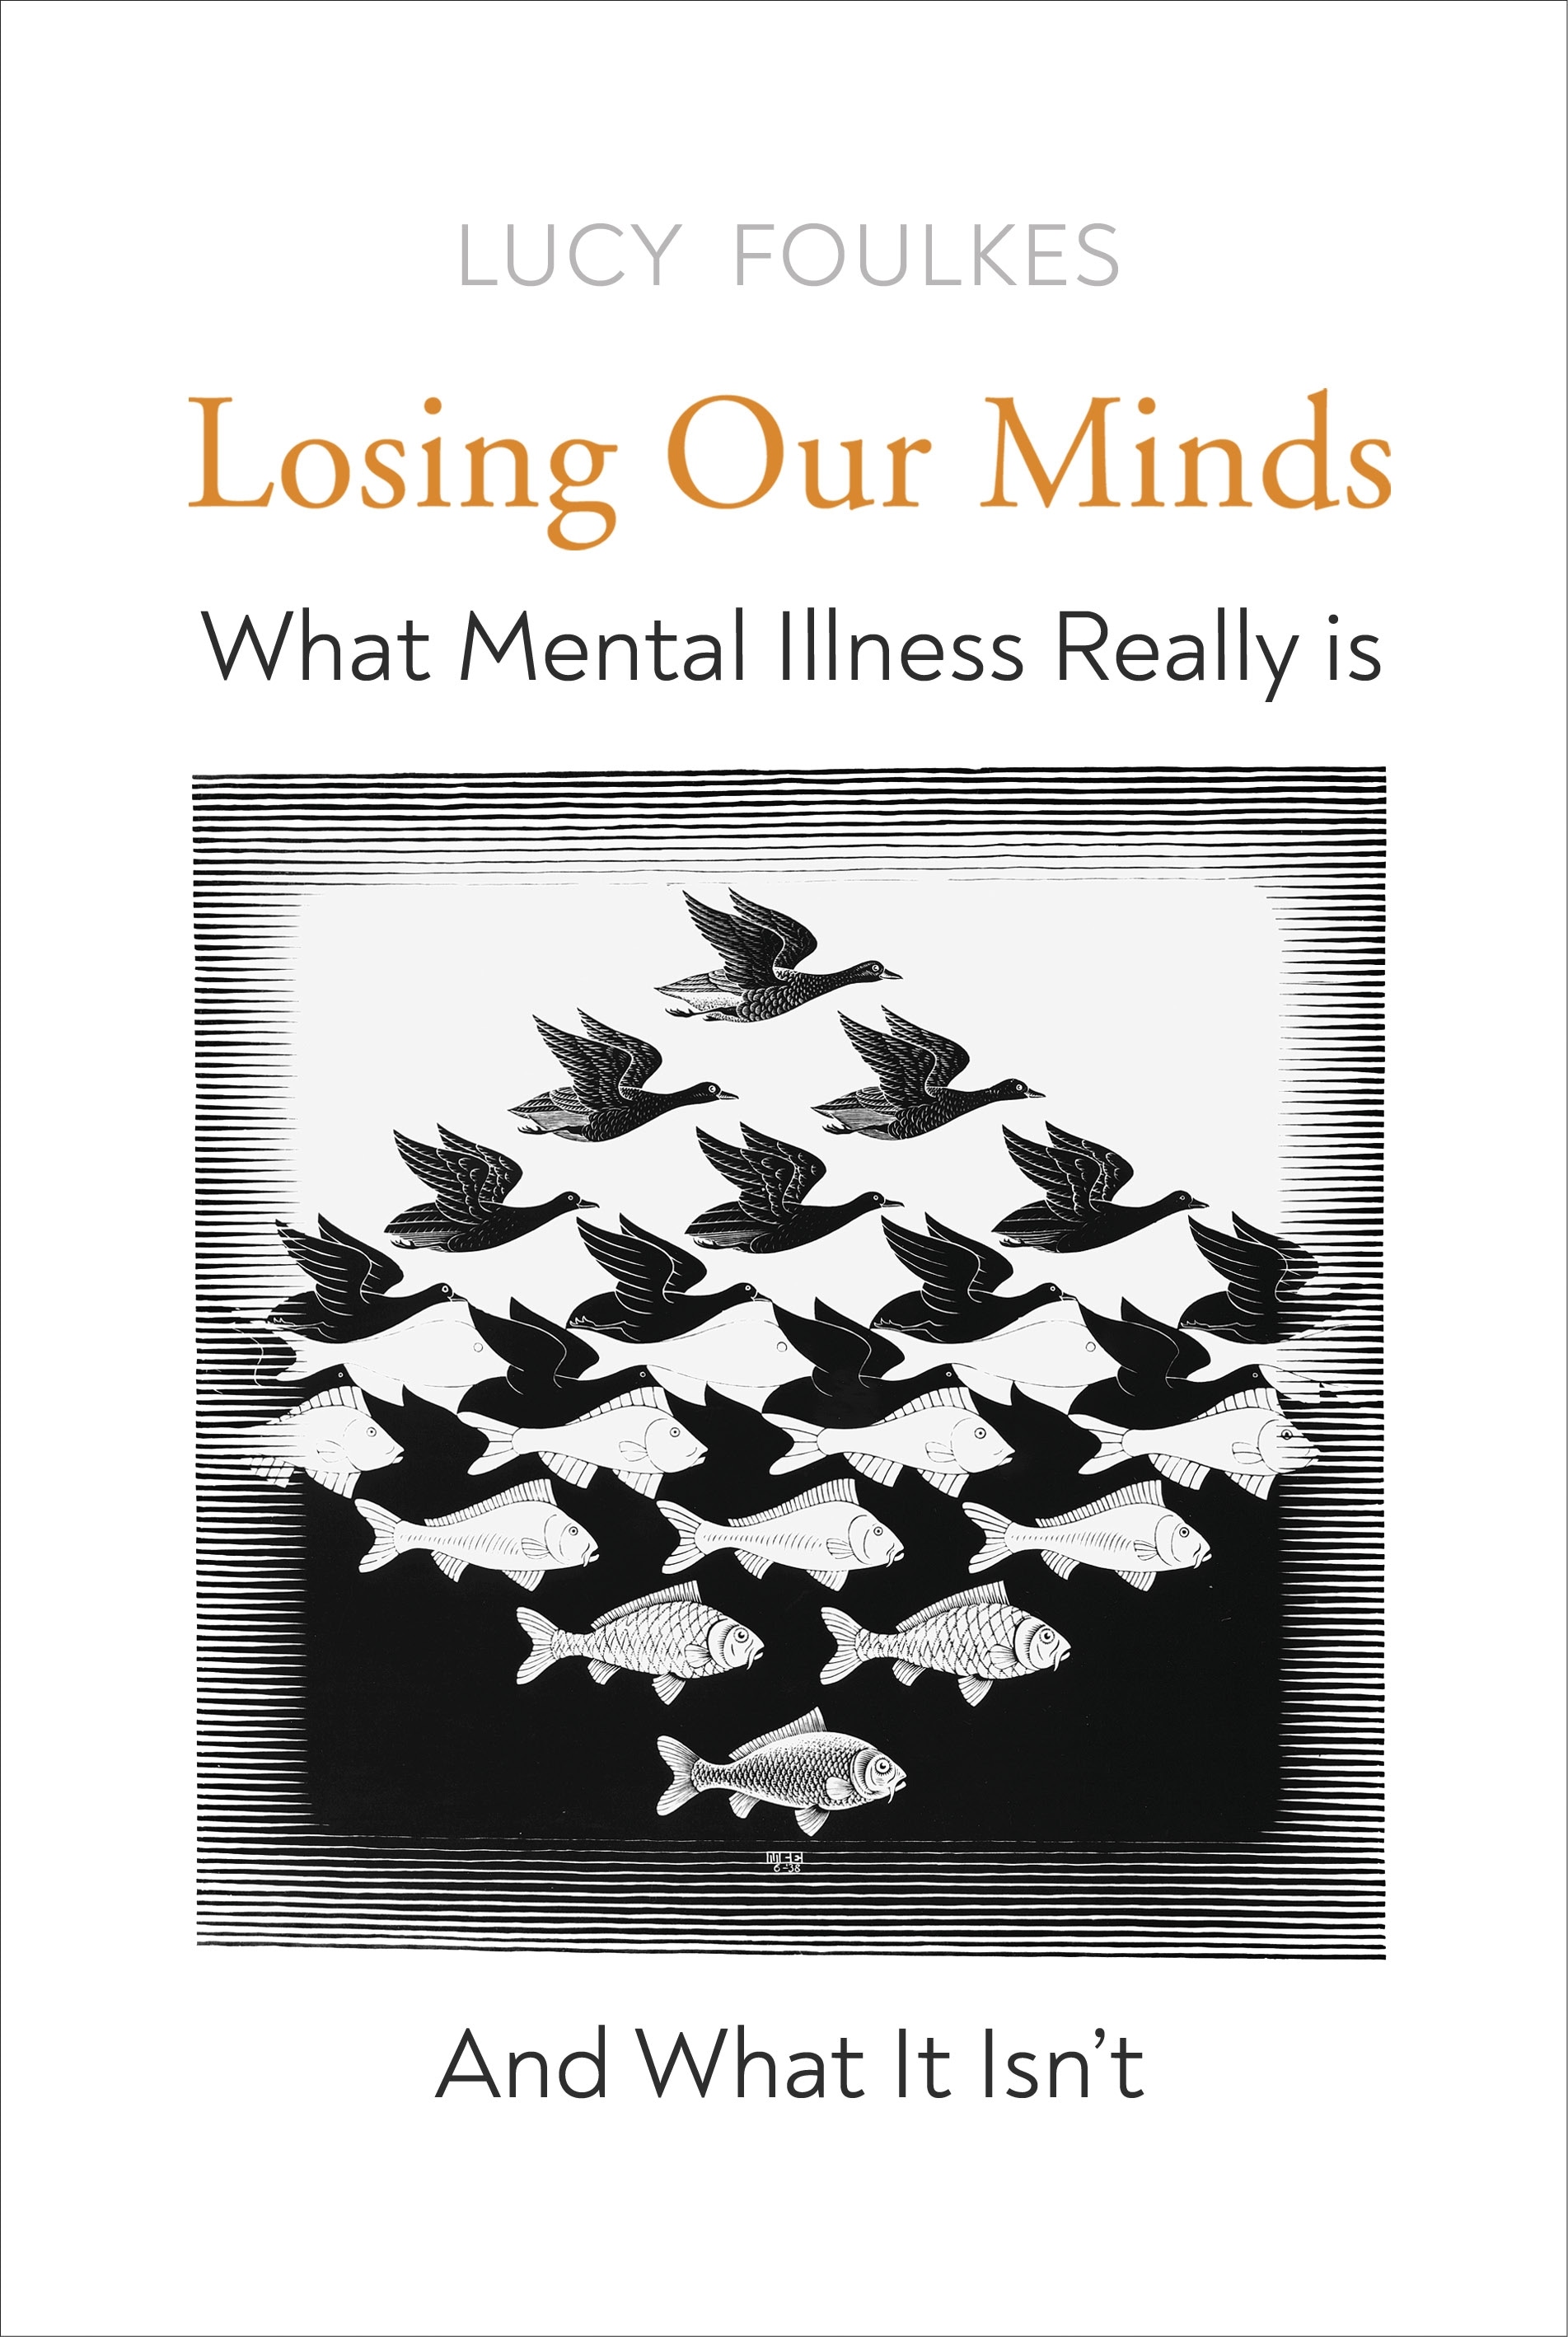 Book “Losing Our Minds” by Lucy Foulkes — April 1, 2021